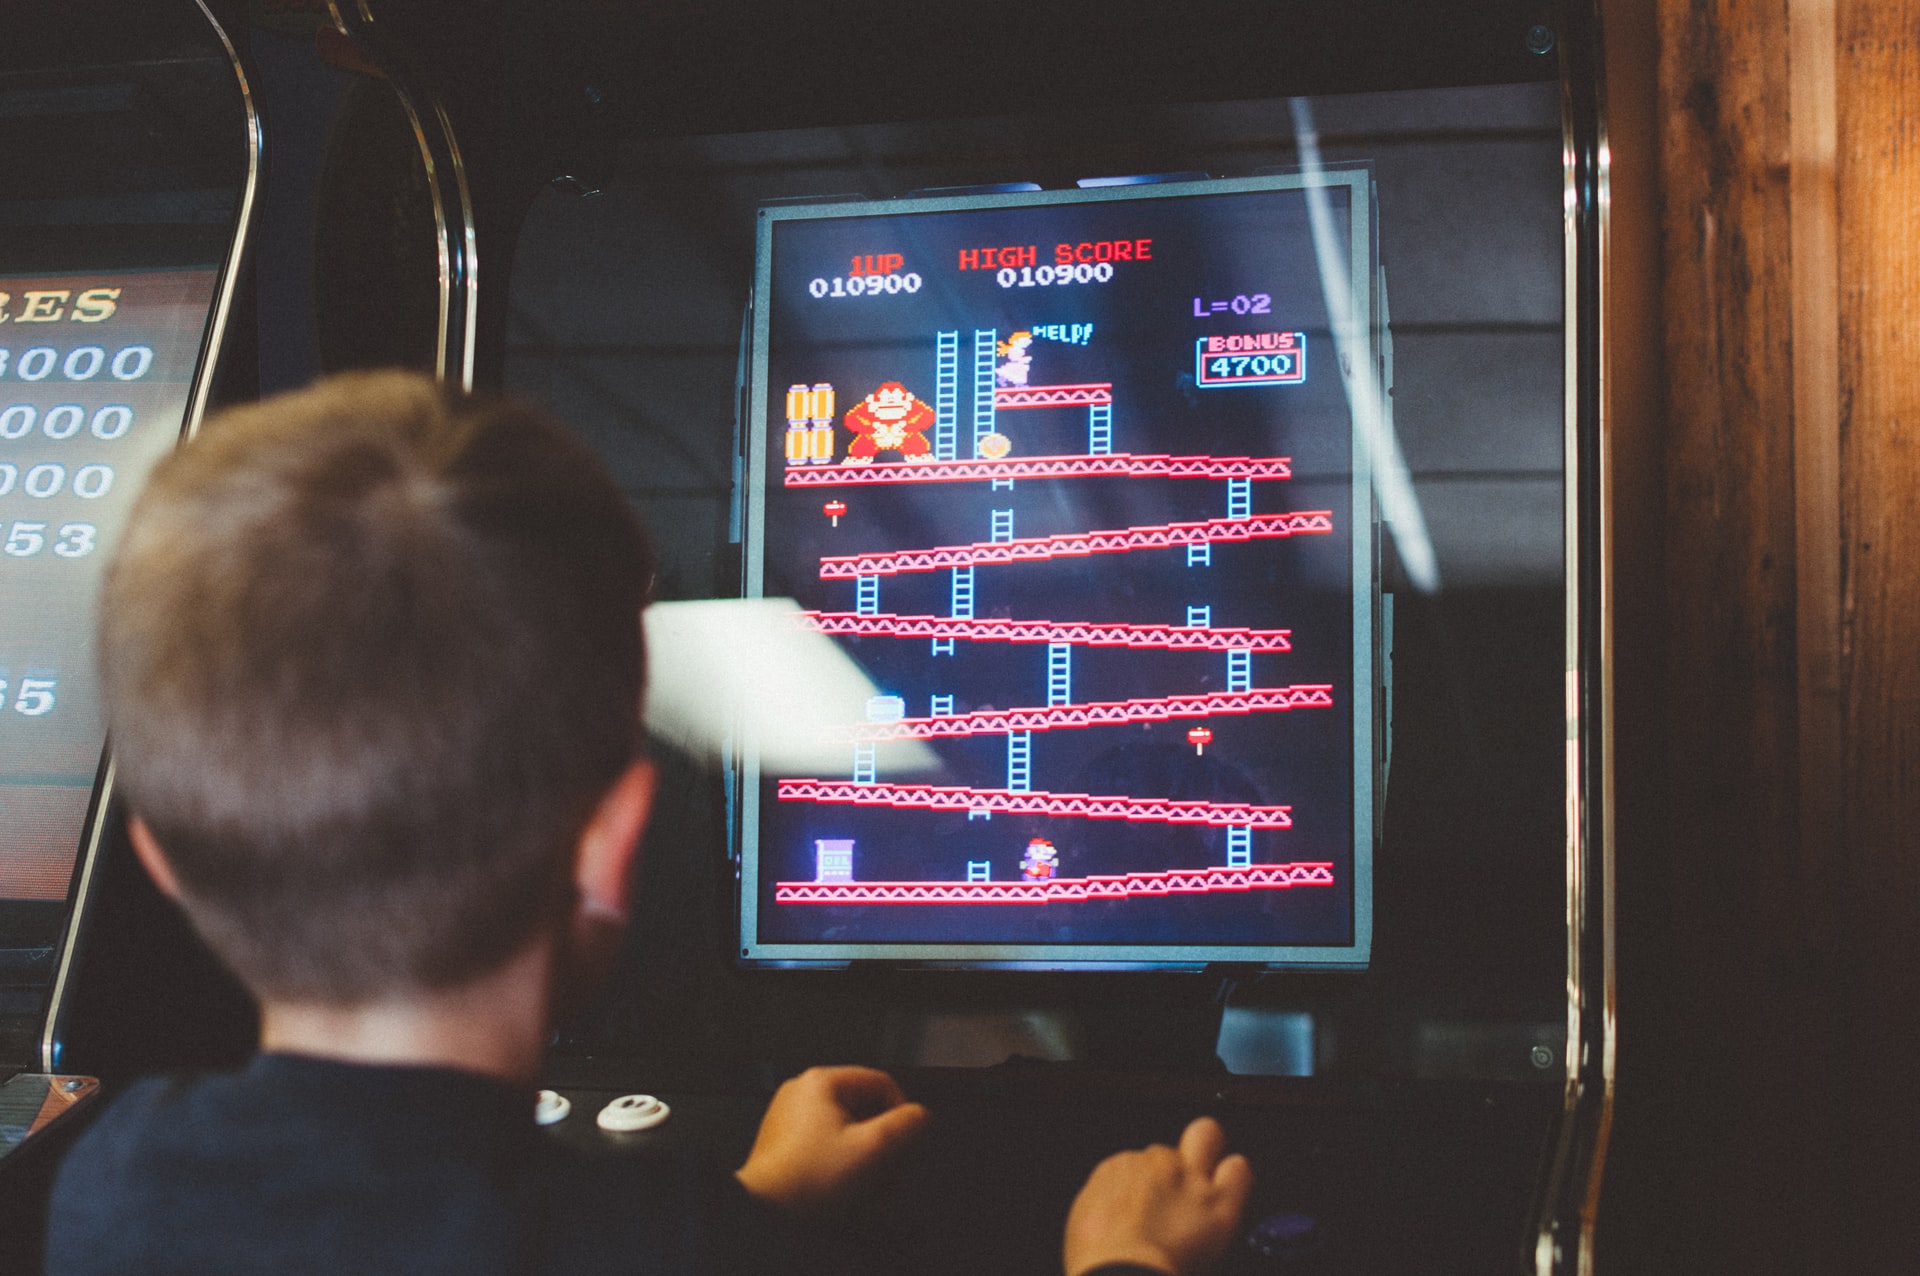 A child playing an arcade game.